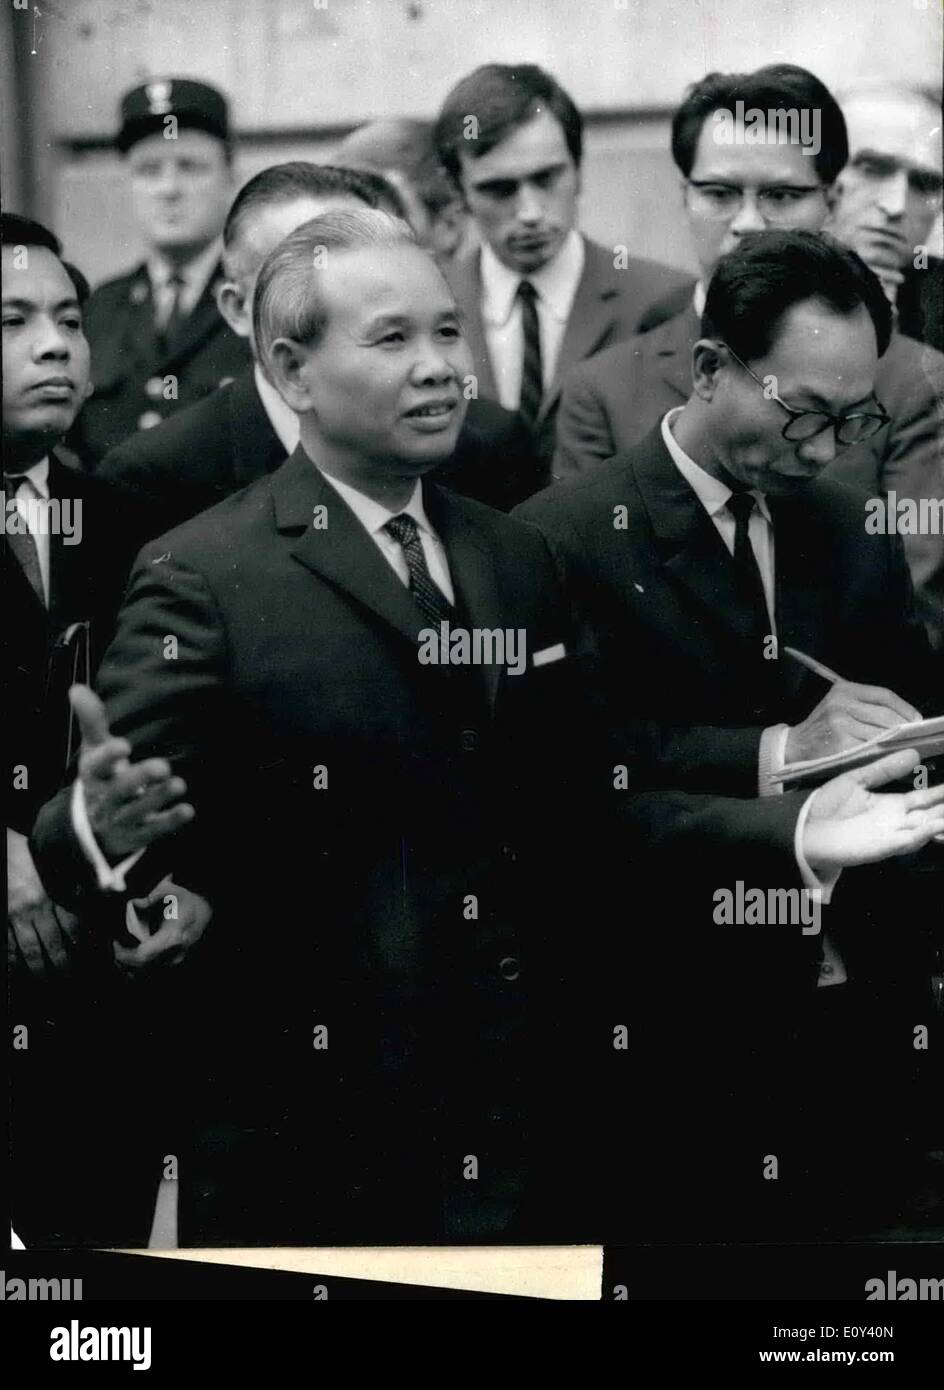 Oct. 10, 1968 - Vietnam War: New Developments in Paris peace talks: Paris Peace talks seem to have reached a point when an important issue may be announced any time. Photo shows Xuan Thuy, Chief of the North Vietnamese Delegation making a statement after the talks this morning. Stock Photo